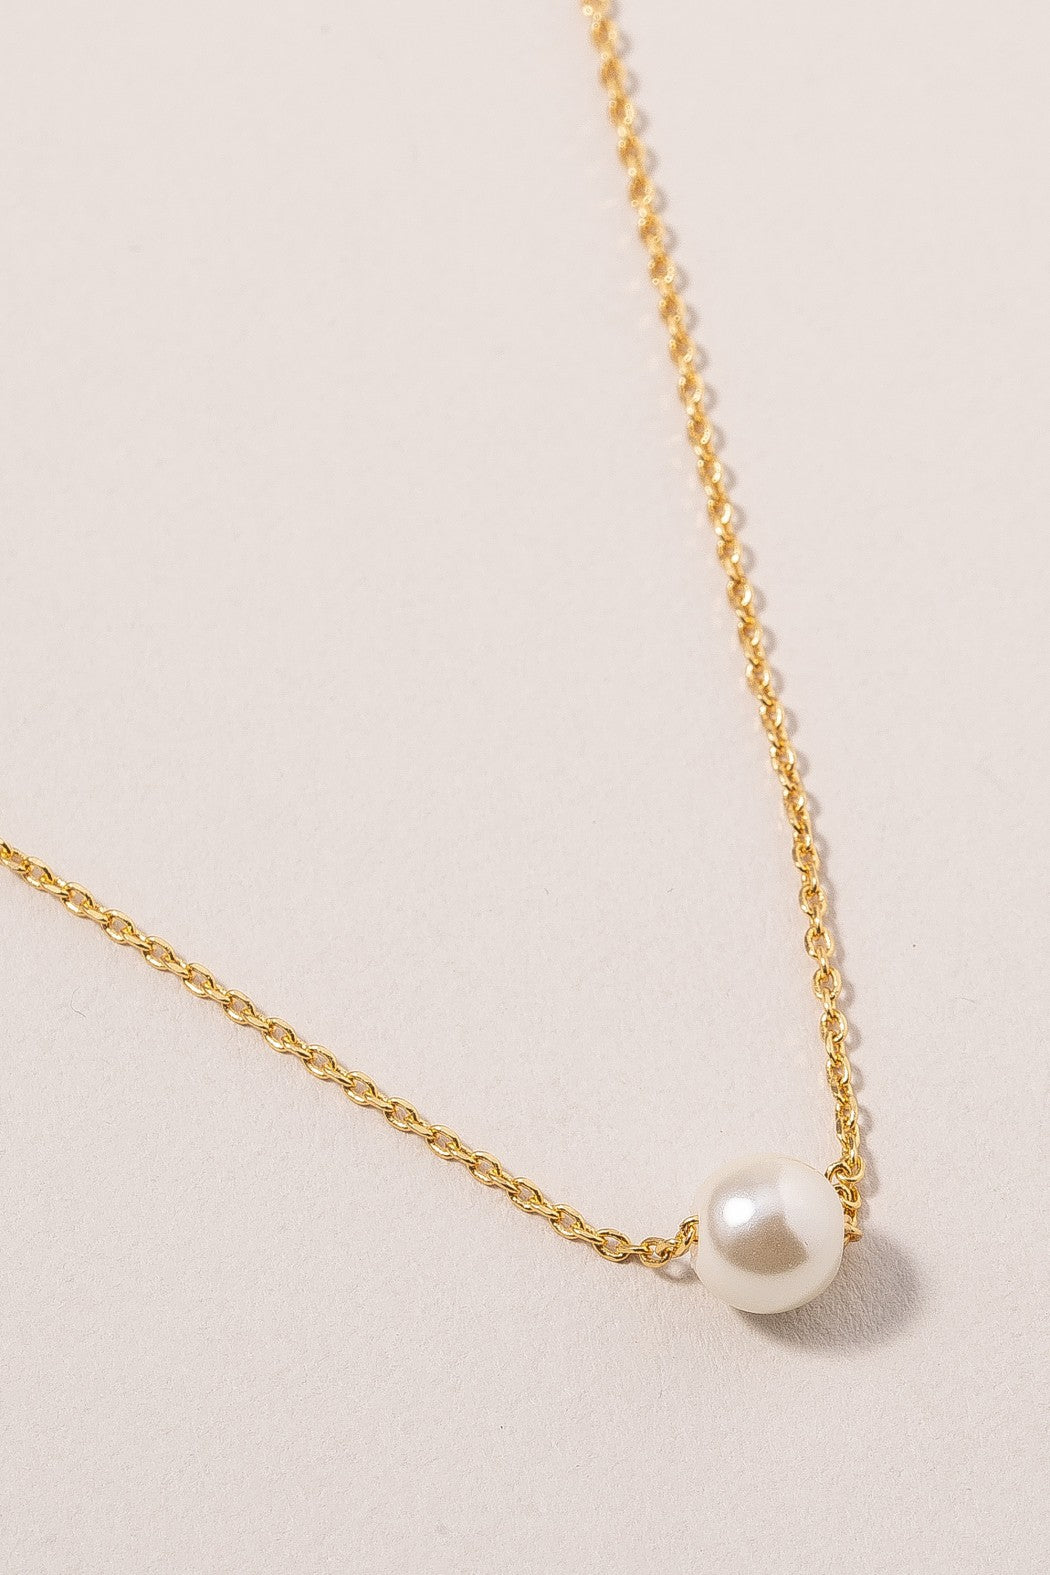 5mm Bridesmaids Pearl Charm Necklace